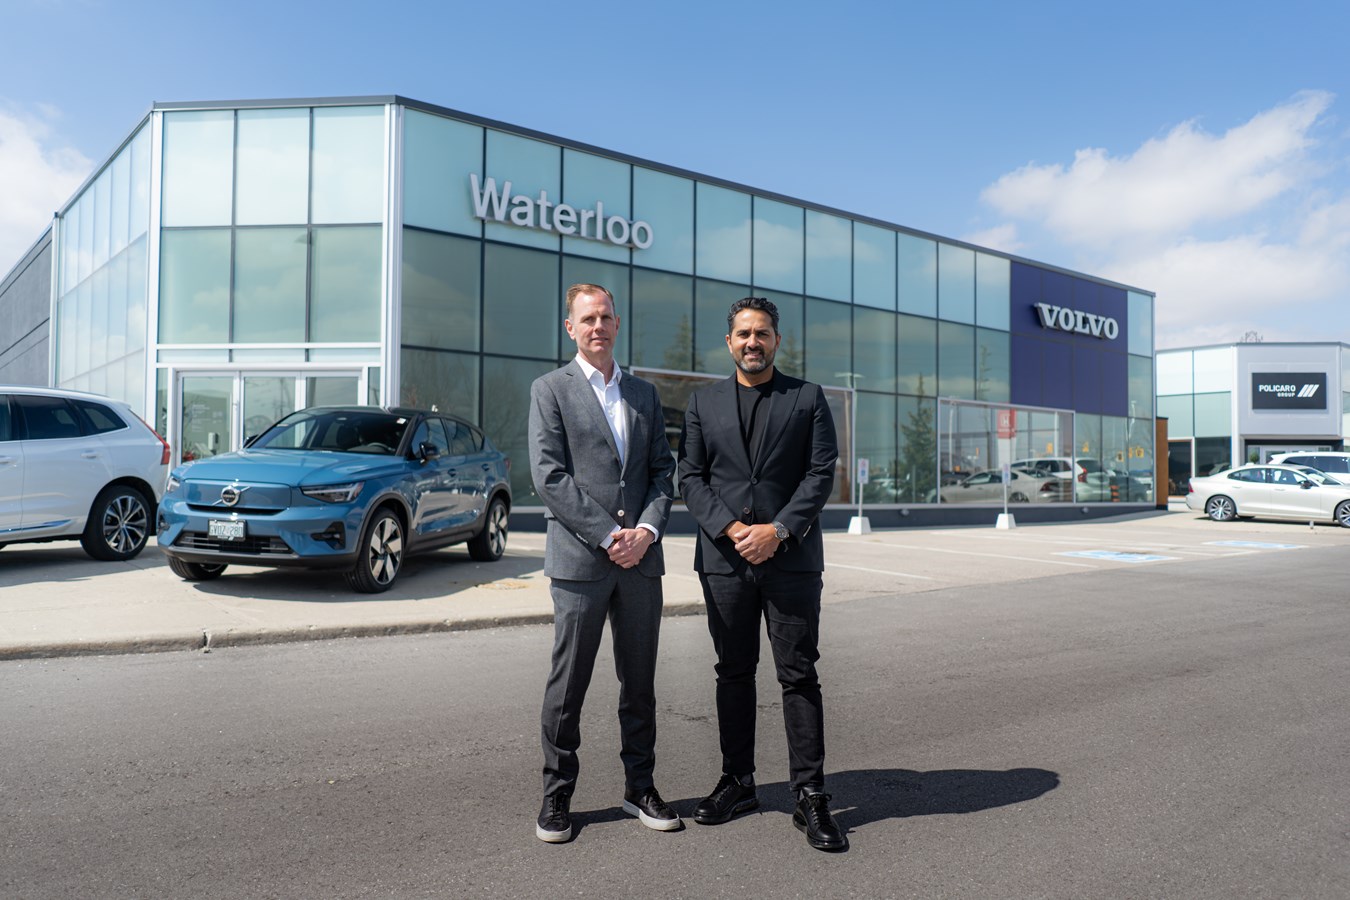 Francesco Policaro, CEO of Policaro Group and Dealer Principal, Anthony Poole, General Manager of Volvo Cars Waterloo